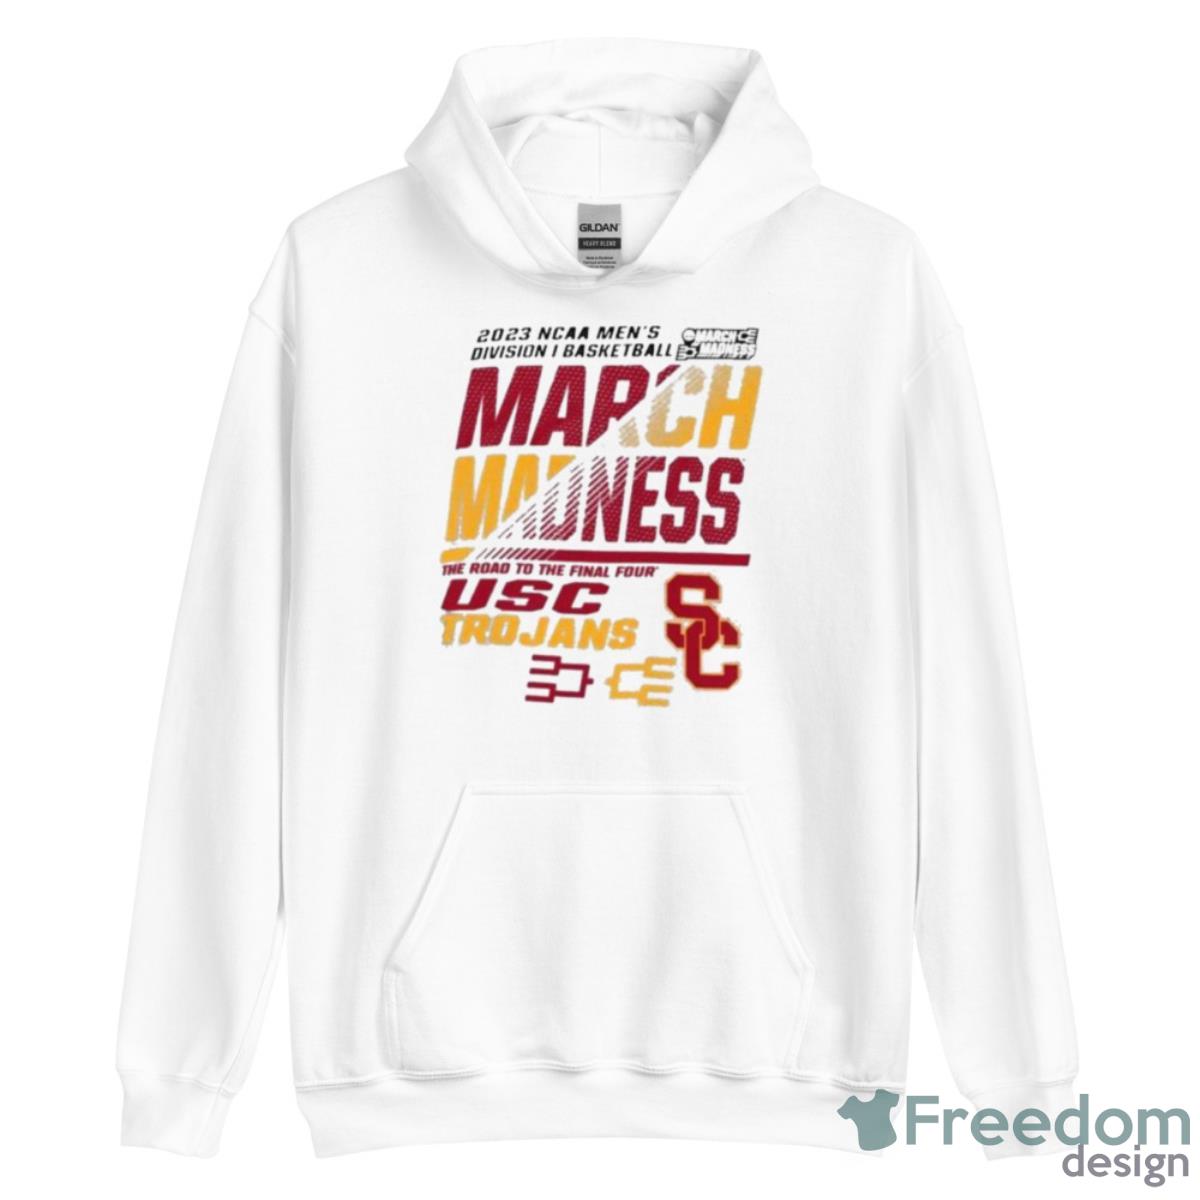 USC Men’s Basketball 2023 NCAA March Madness The Road To Final Four Shirt